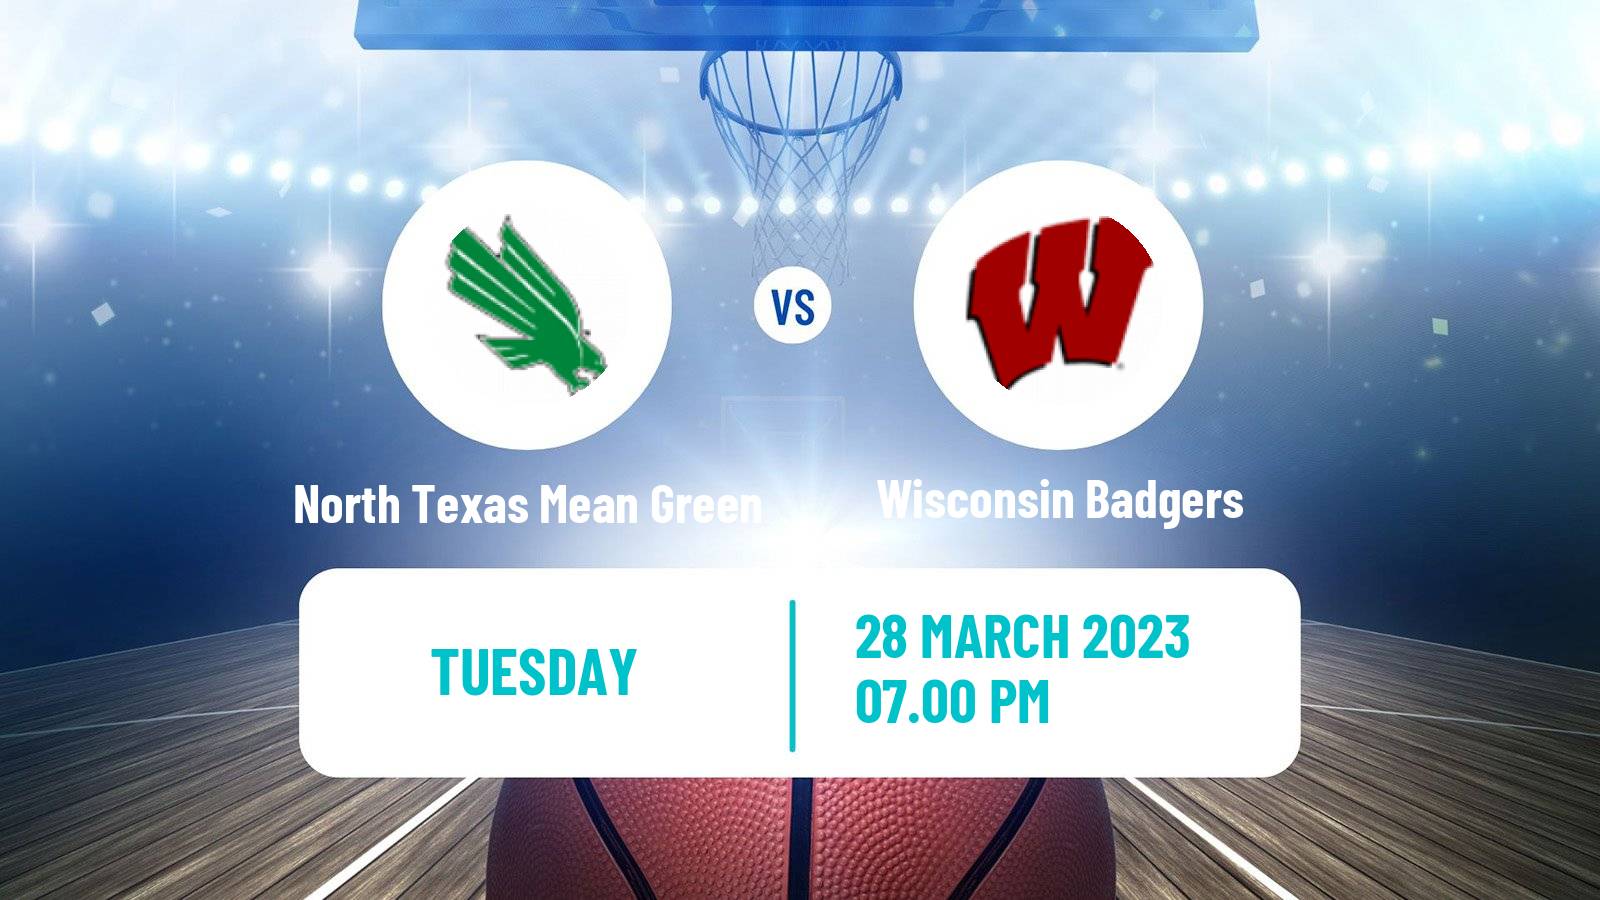 Basketball NIT North Texas Mean Green - Wisconsin Badgers